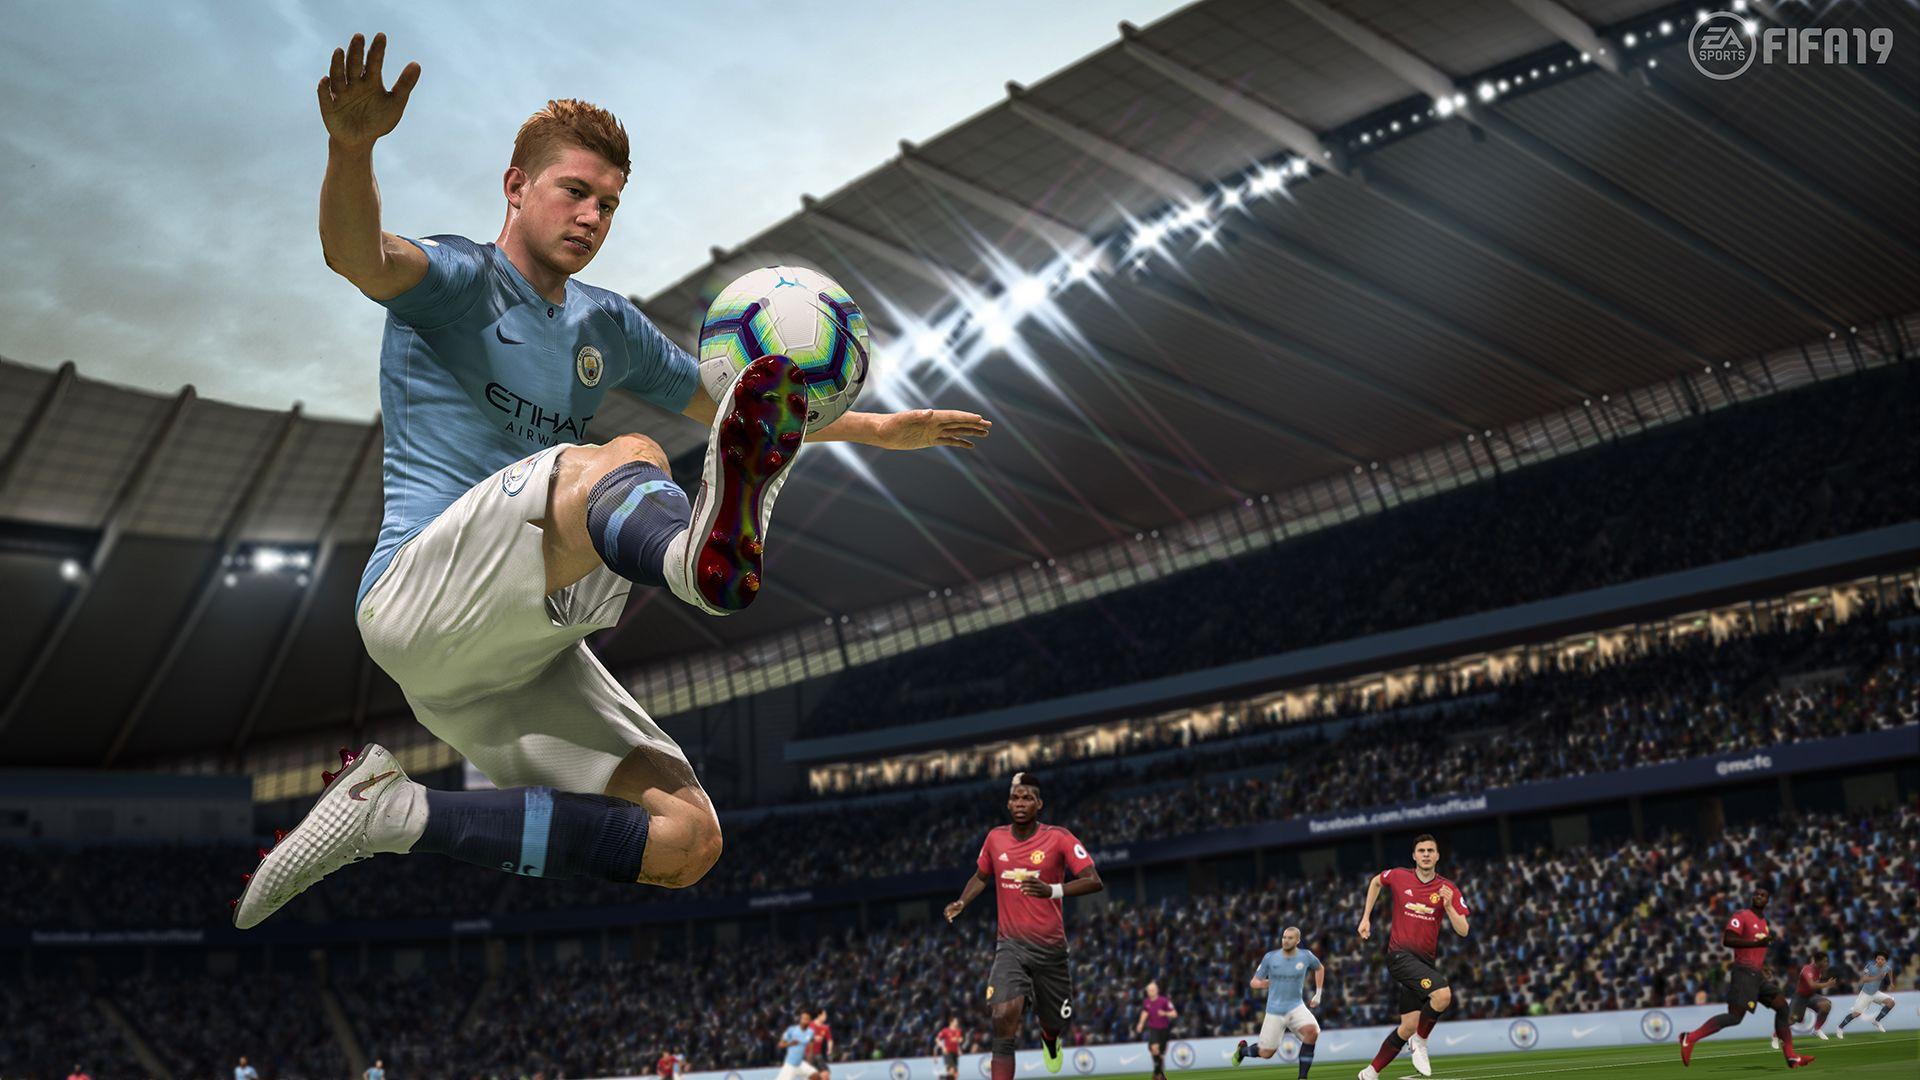 FIFA 19 Will Feature Three New, Never Seen Before Game Modes